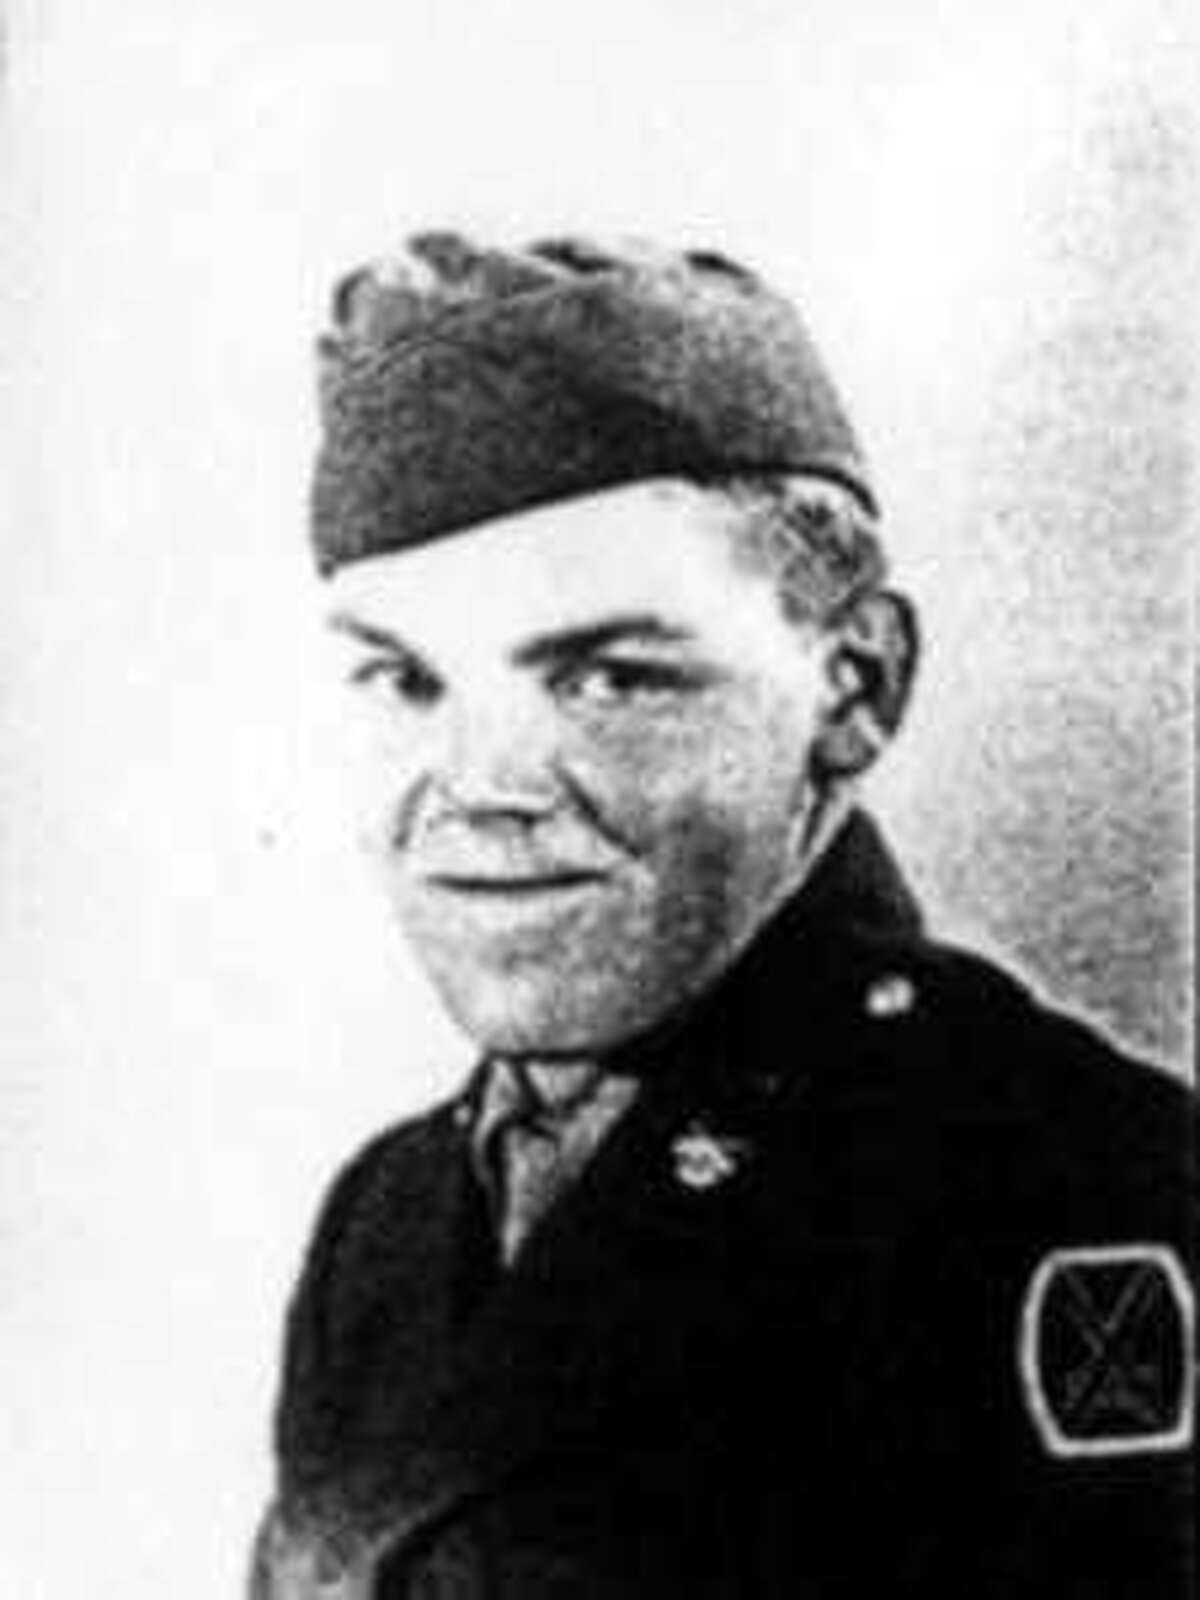 Army Cpl. Walter A. Smead of Hadley, N.Y. was listed as missing in action in Korea in 1950 after the Battle of the Chosin Reservoir. He was listed as presumed dead 1953 and his remains were returned to the U.S. in 2018 from North Korea. His remains will be interred Monday, Sept. 20, 2021, at Gerald B. H. Solomon Saratoga National Cemetery in Schuylerville.